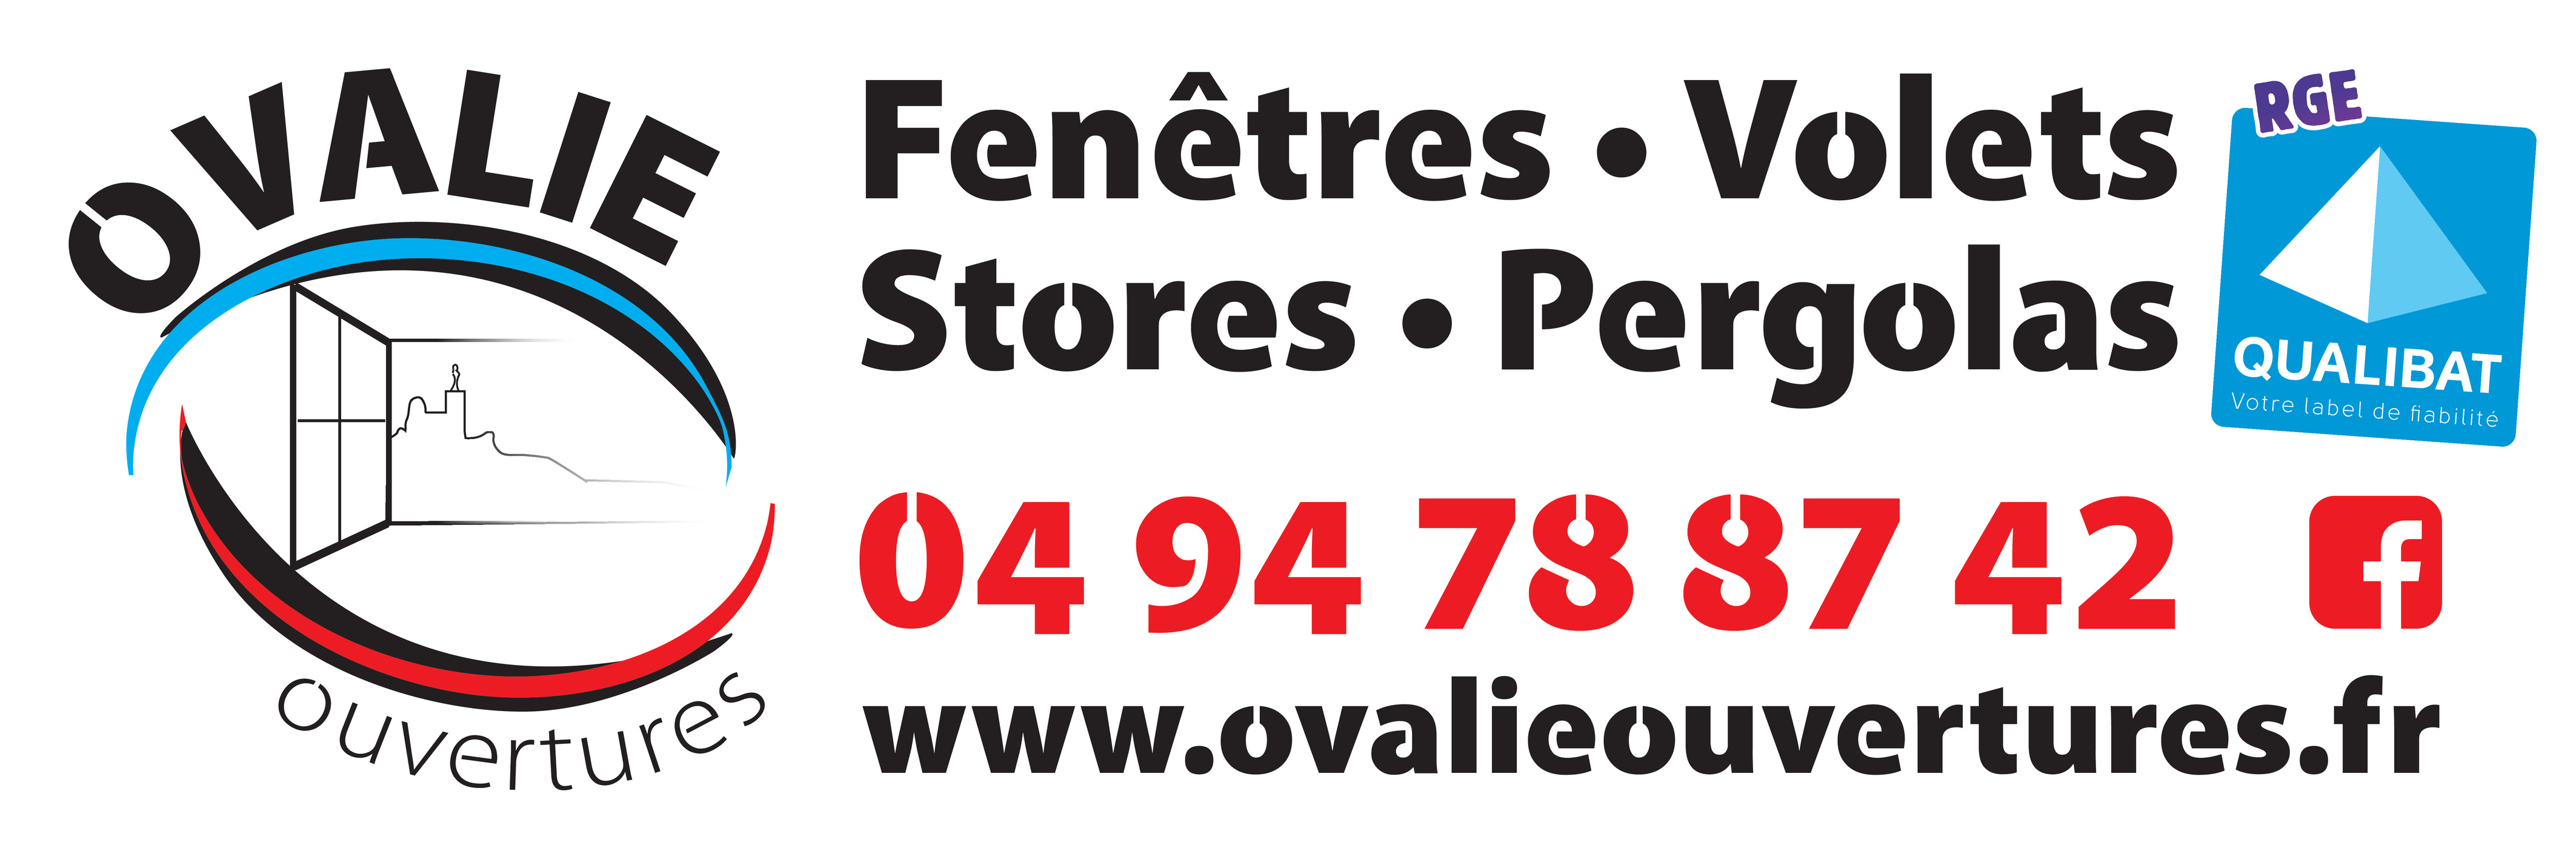 OvalieOuvertures